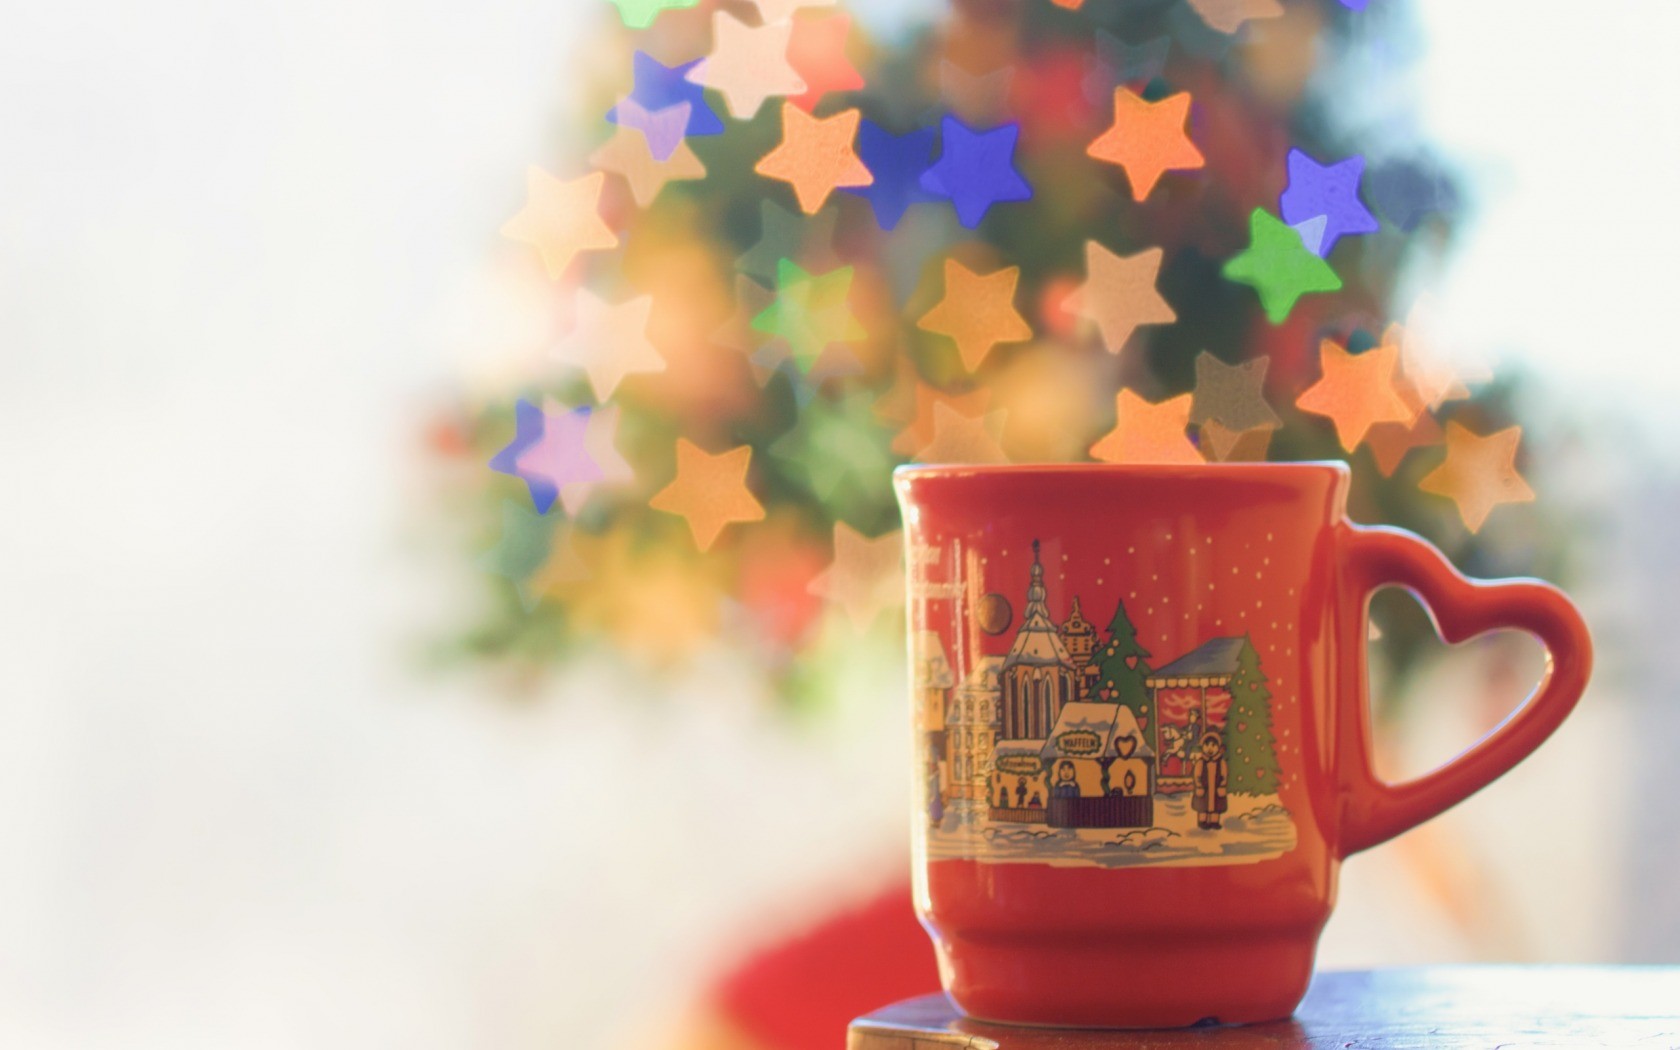 General 1680x1050 Christmas cup indoors red